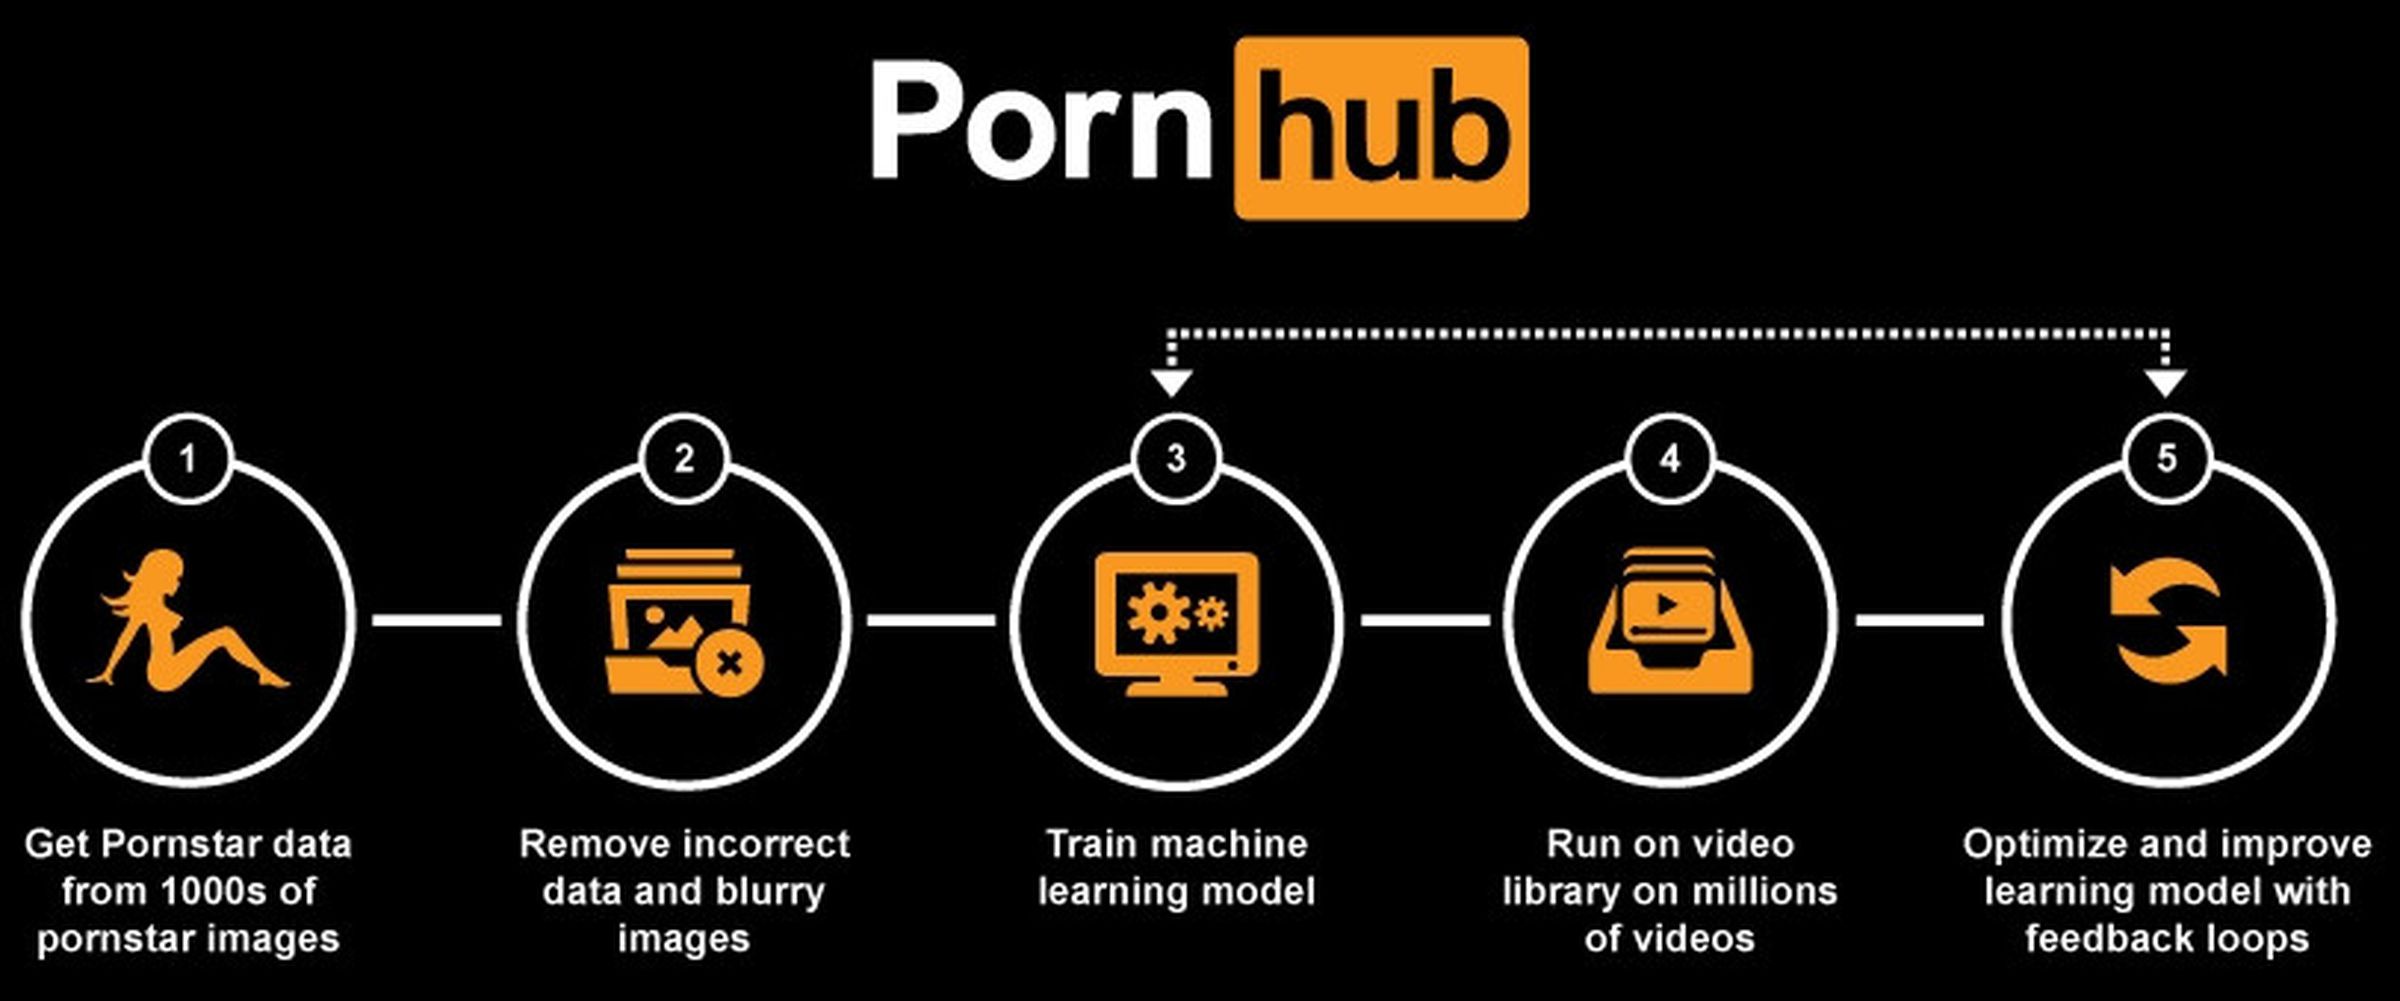 Pornhub’s machine learning models will improve over time as users verify its guesses. 